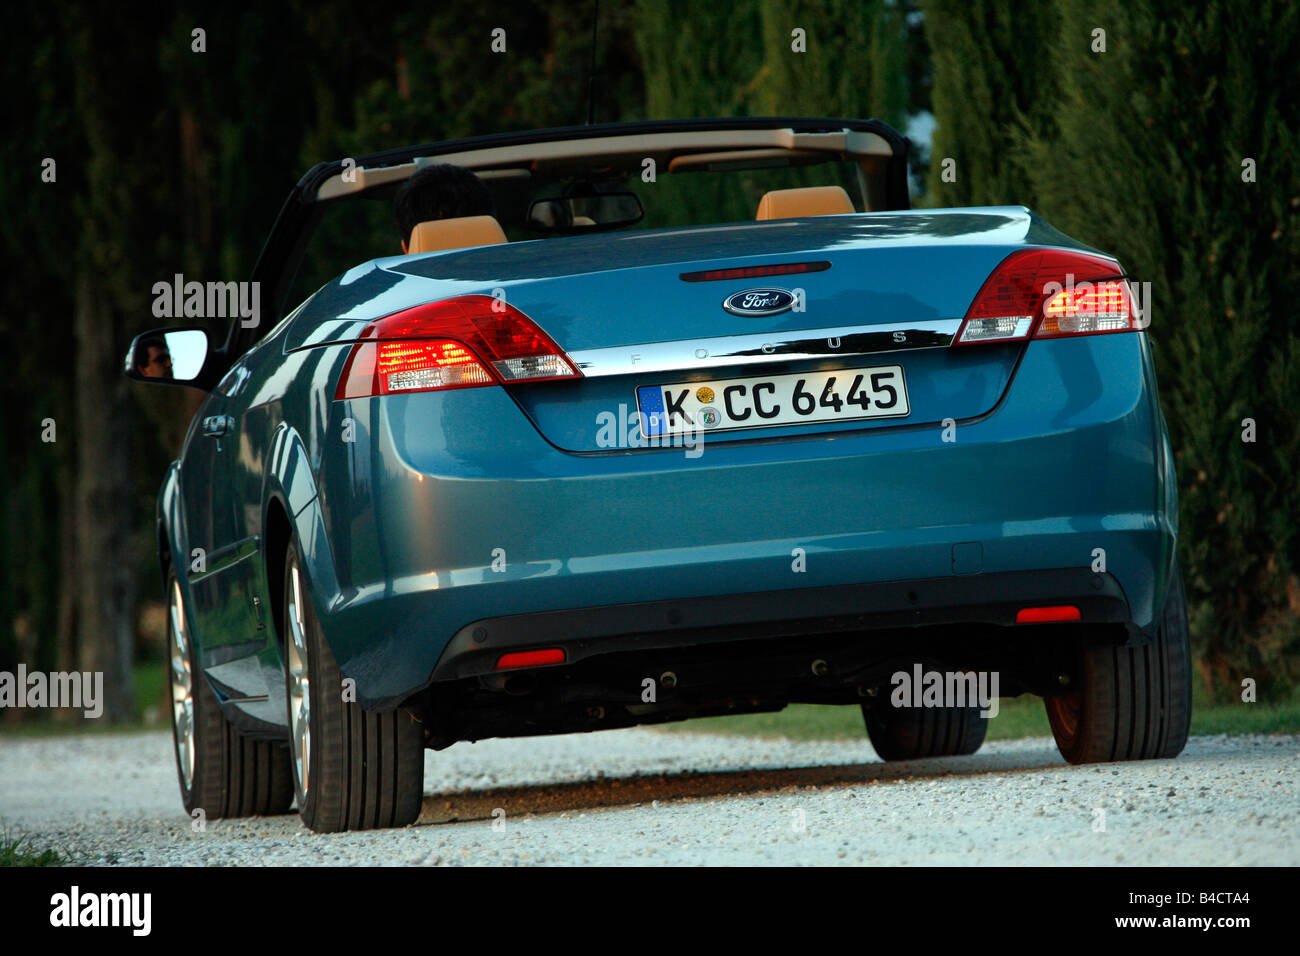 Ford Focus Coupe-Convertible 2.0, model year 2006-, standing, upholding, diagonal from the back, rear view, country road, open t Stock Photo